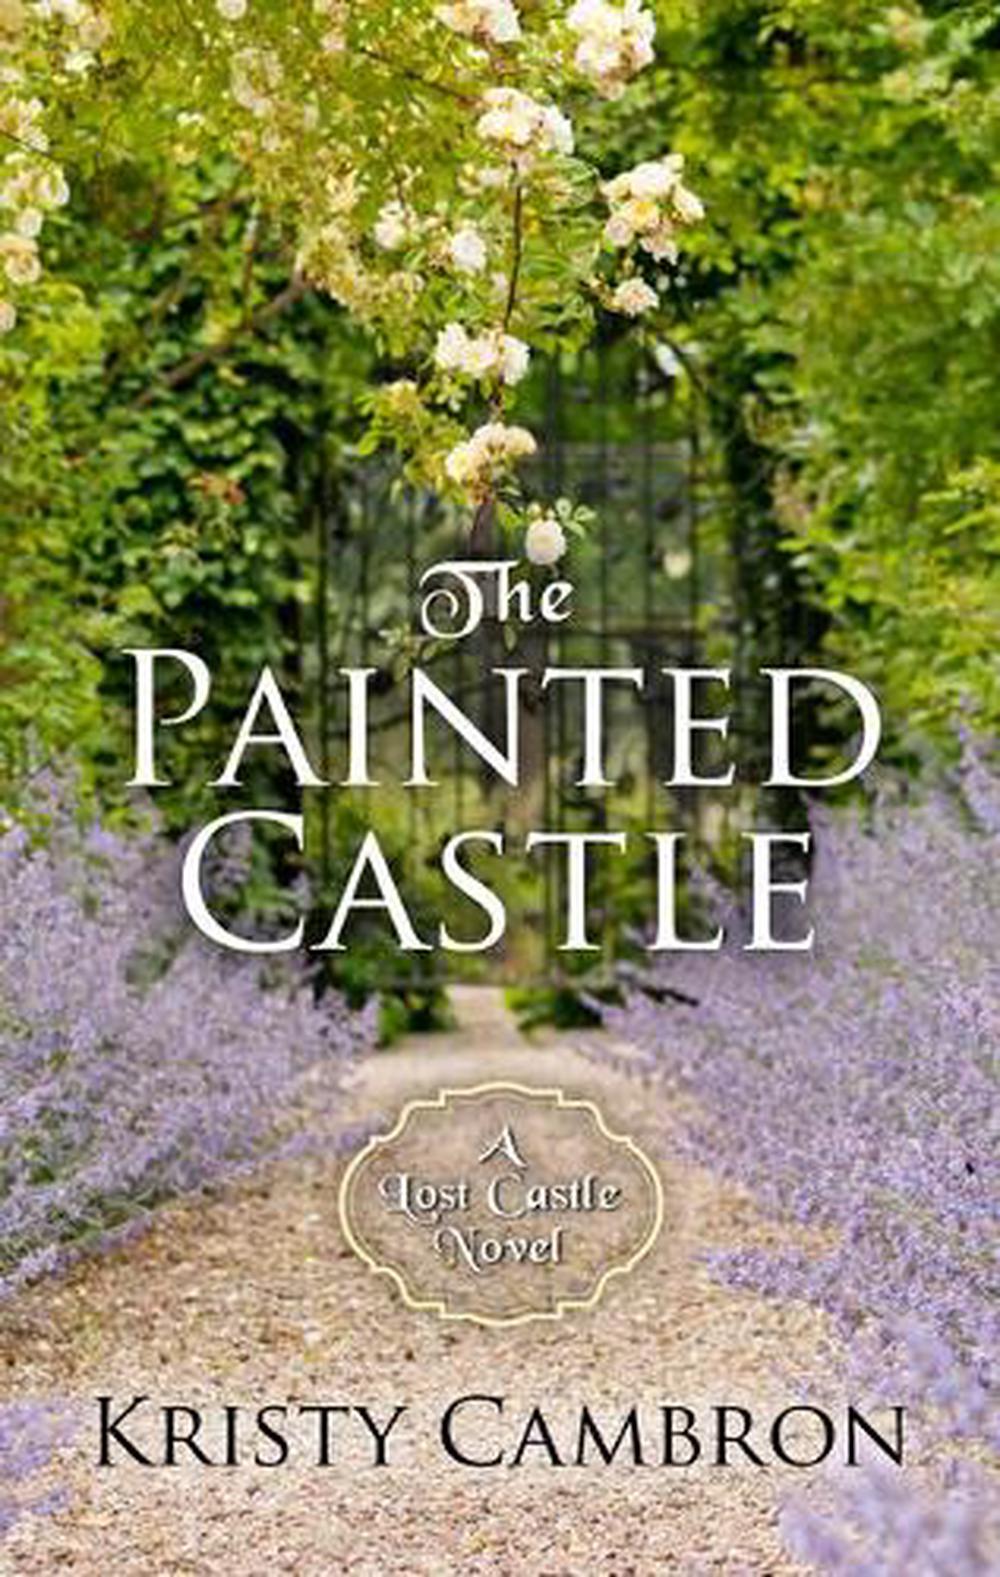 The Painted Castle by Kristy Cambron